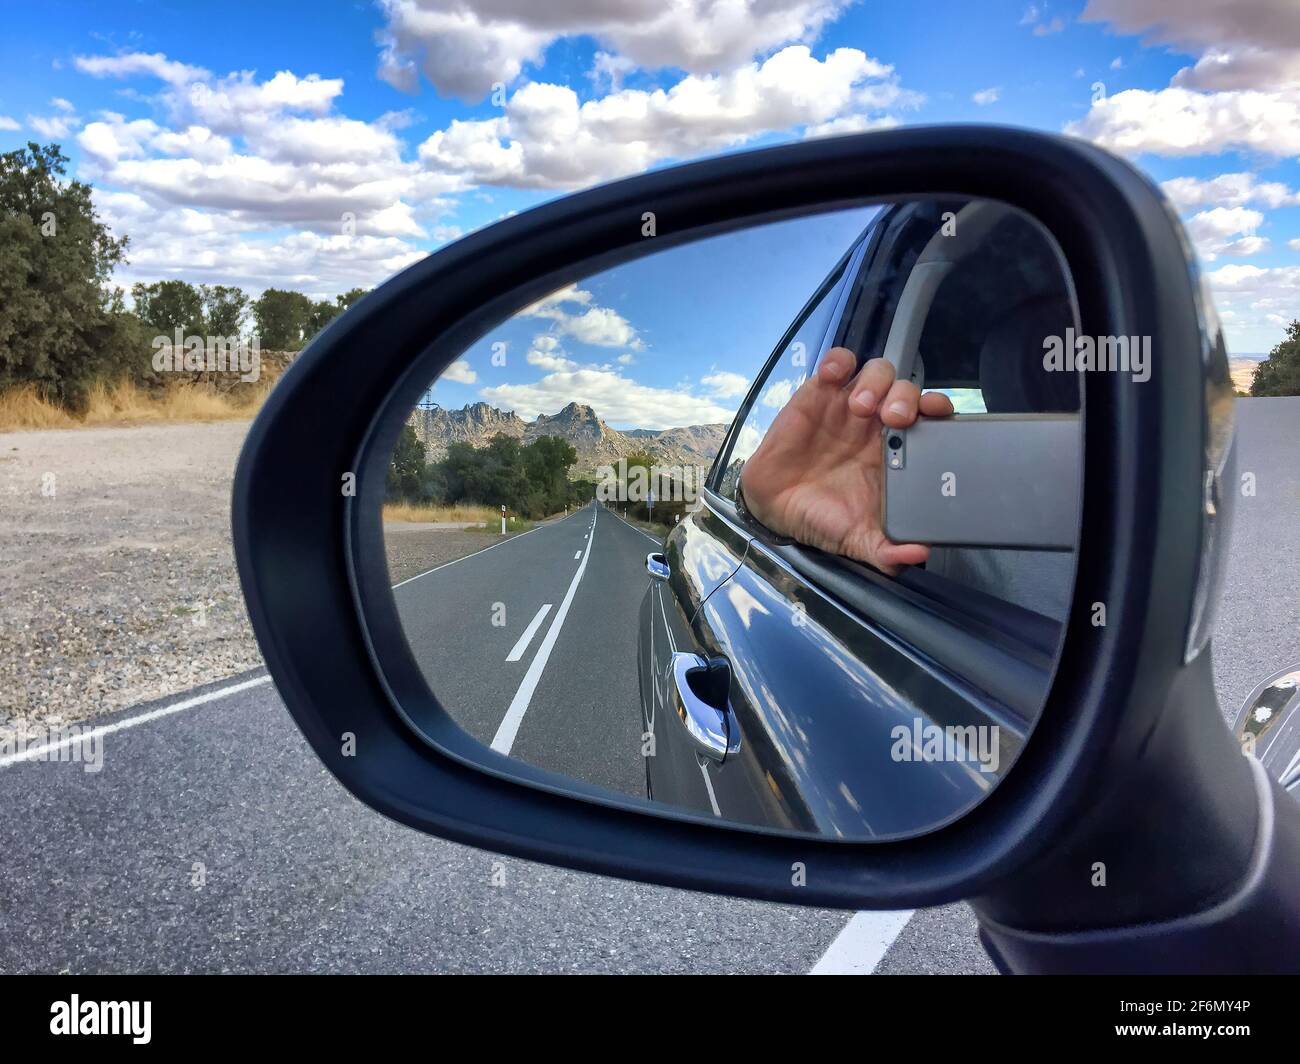 reflection in the rearview mirror of a car of a hand with a cell phone taking a picture of the reflection showing a road with a mountain landscape in Stock Photo